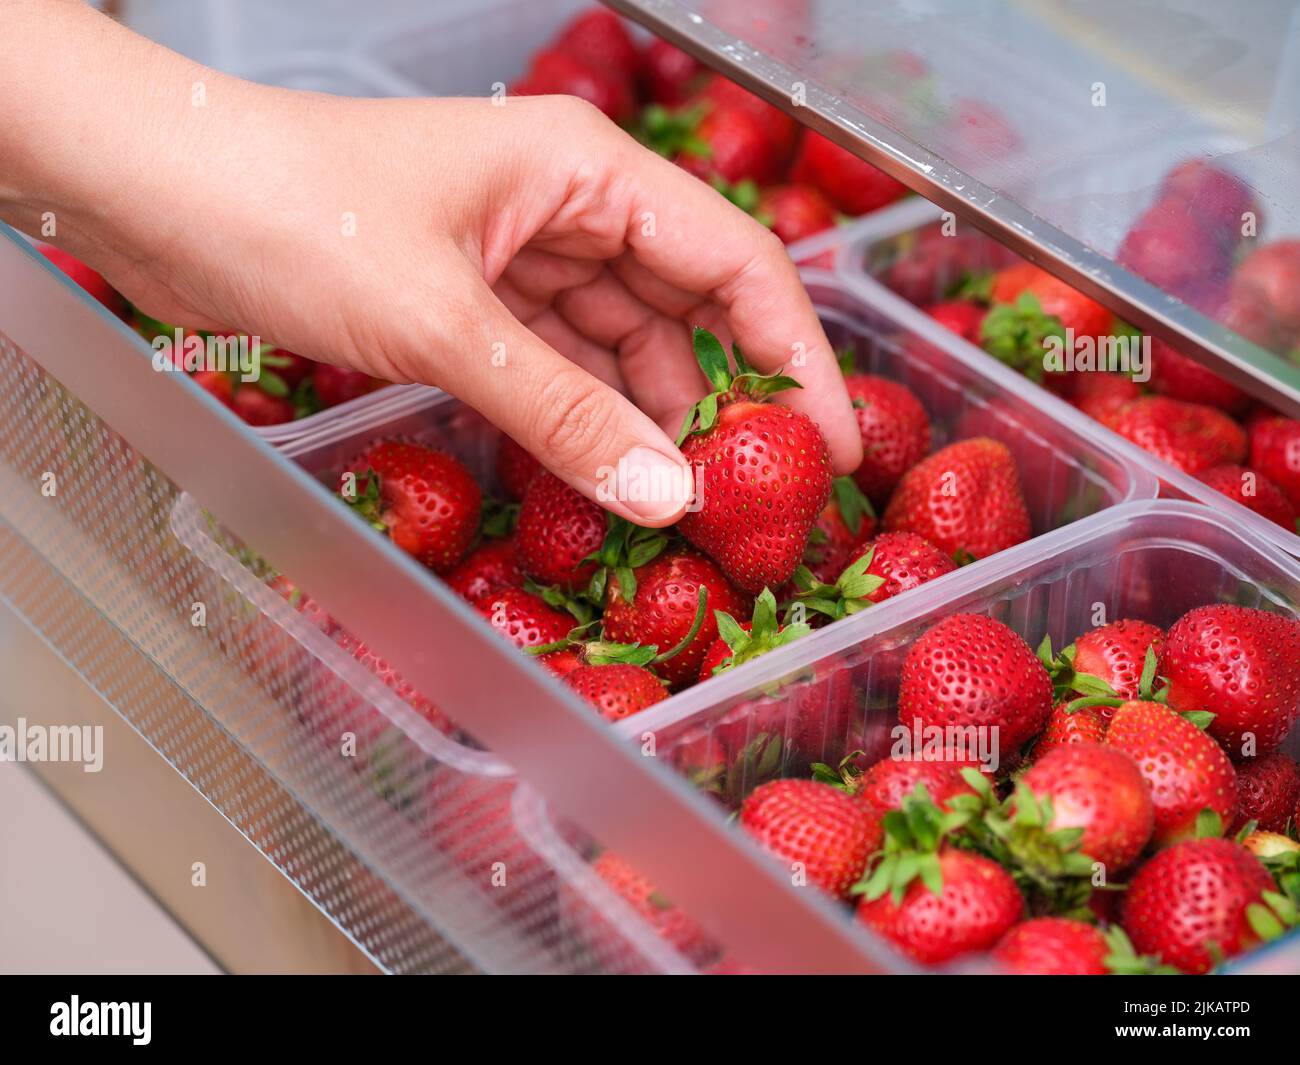 A woman taking a organic red strawberry out of a container in a fridge Stock Photo